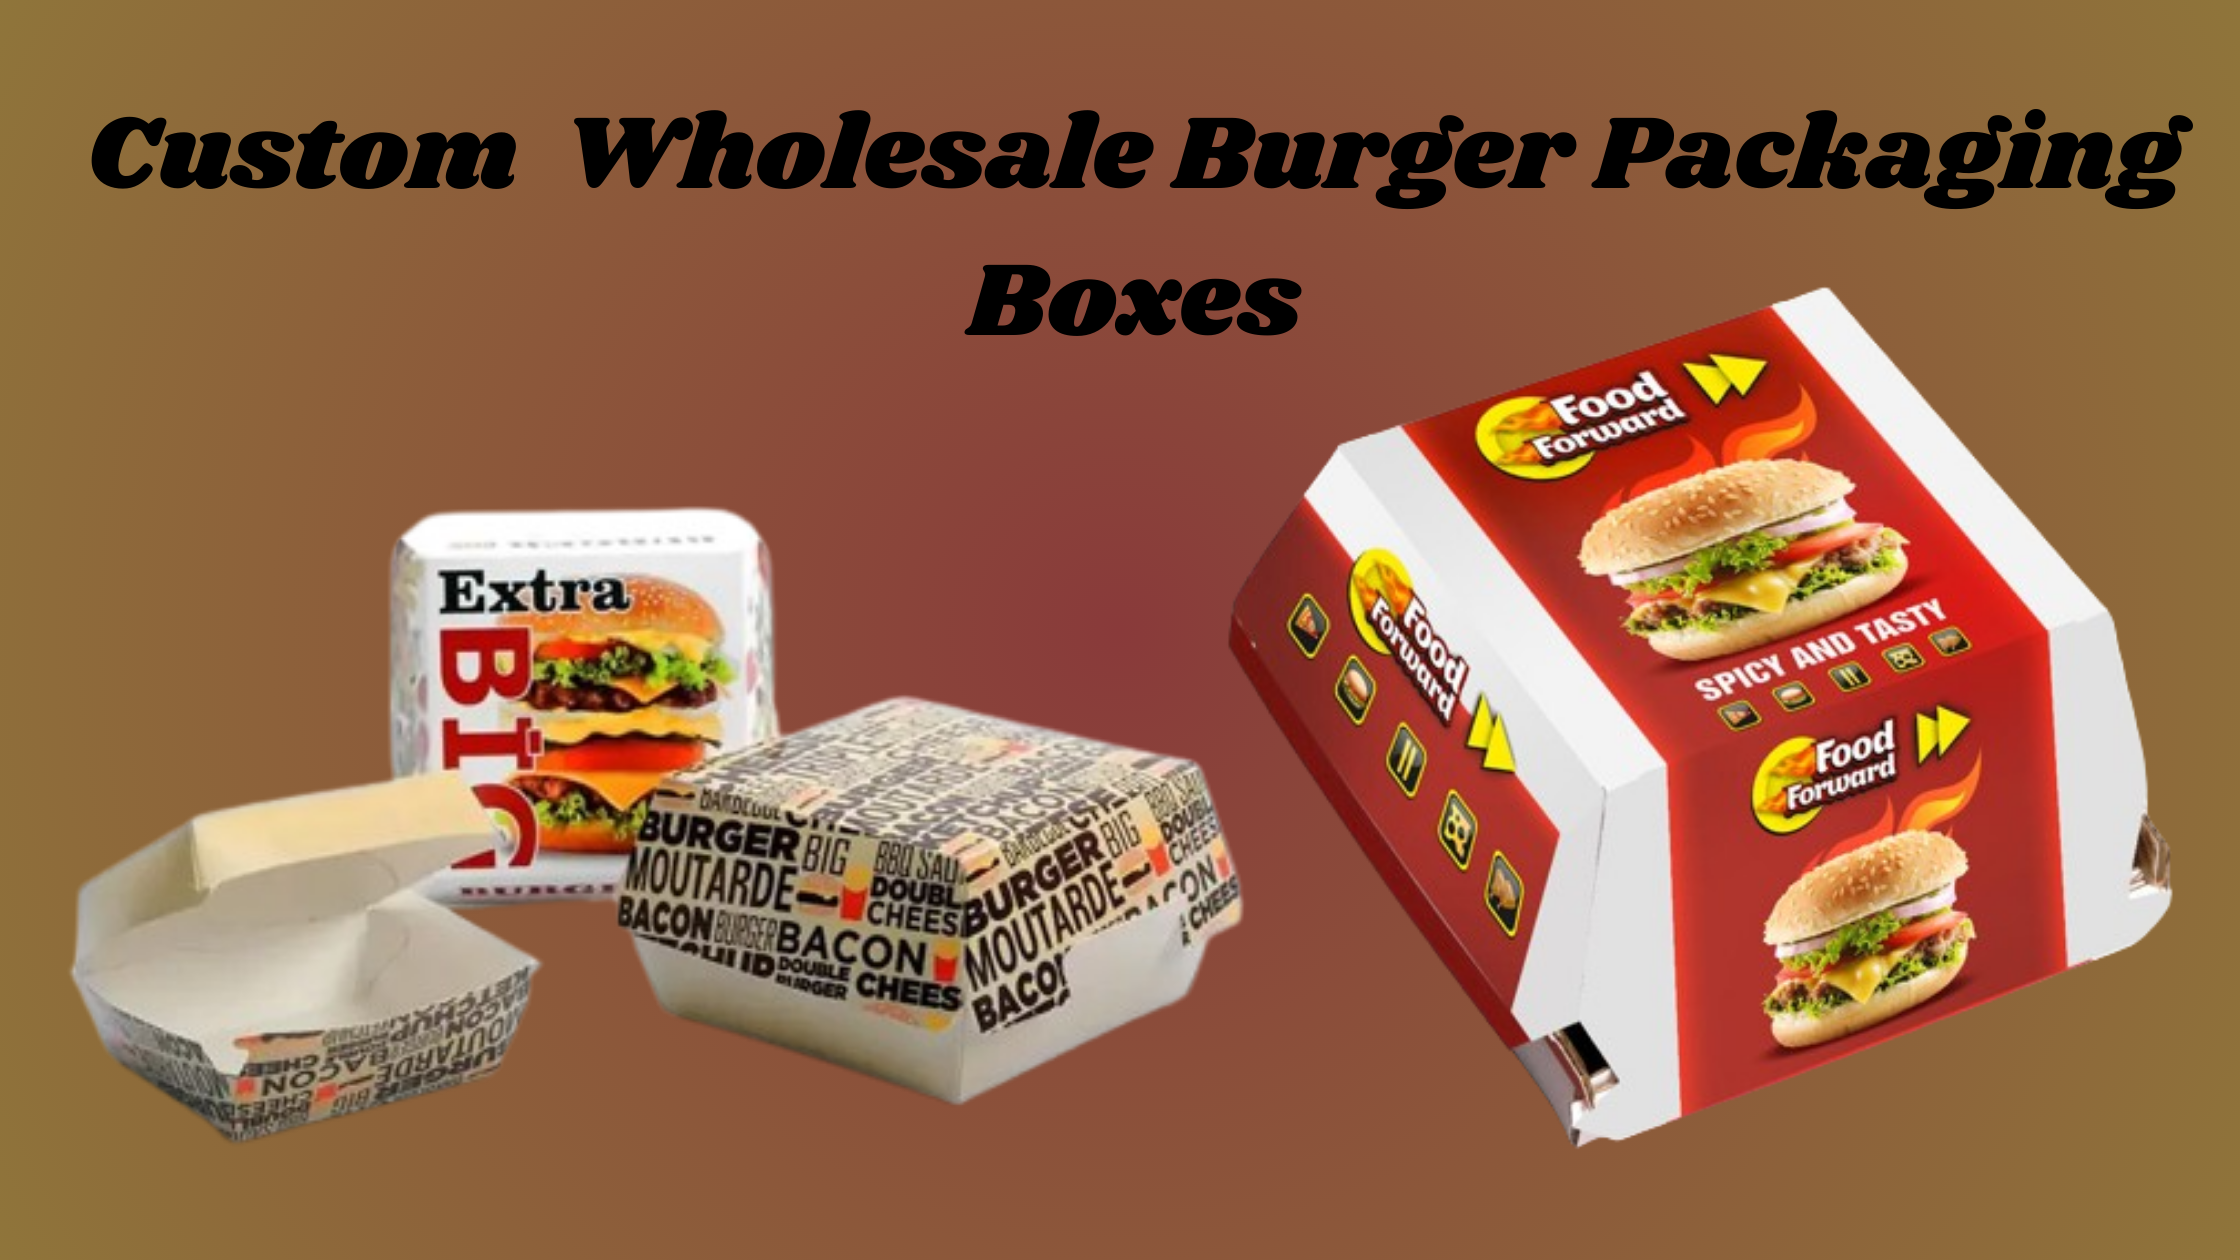 Burger Boxes Wholesale: Providing Quality Packaging Solutions